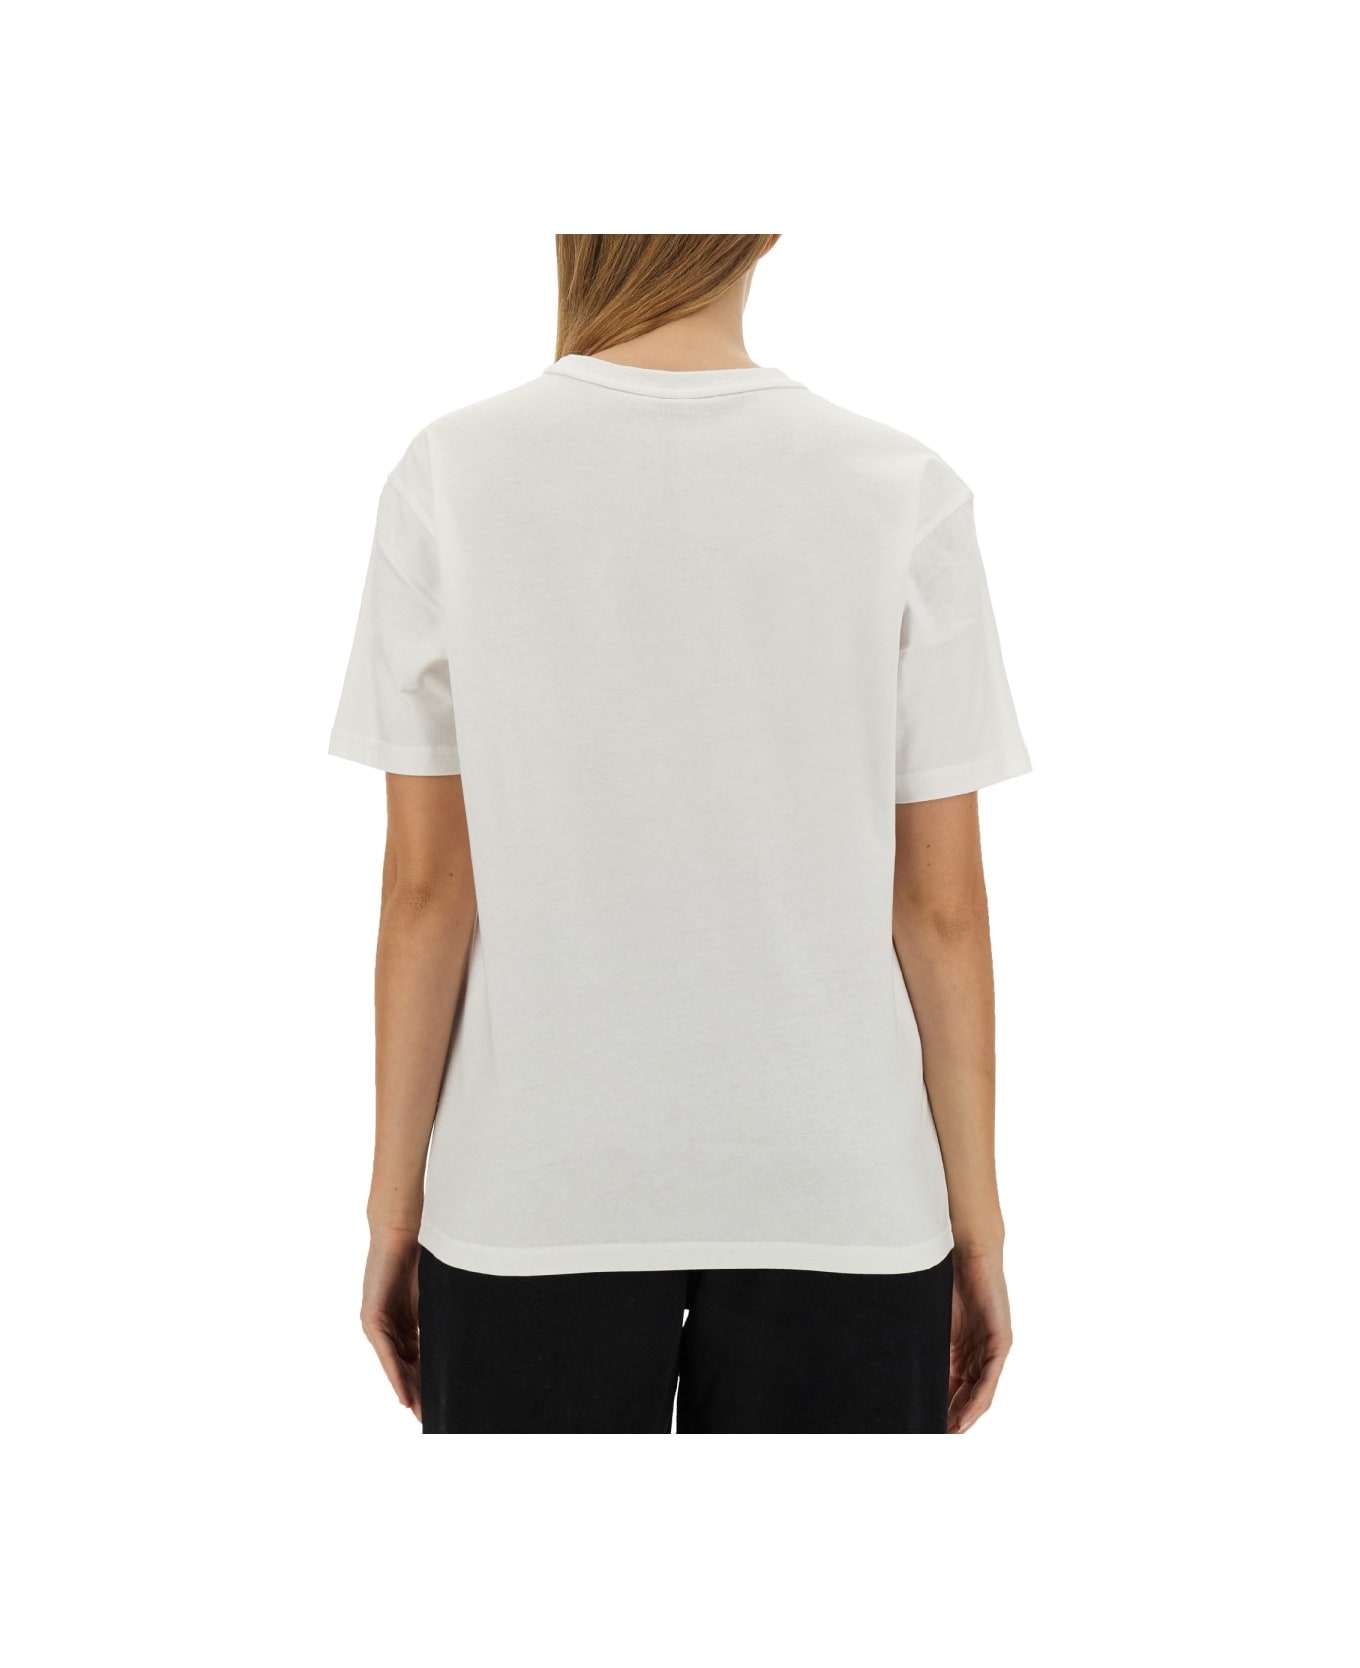 T by Alexander Wang Essential T-shirt - WHITE Tシャツ